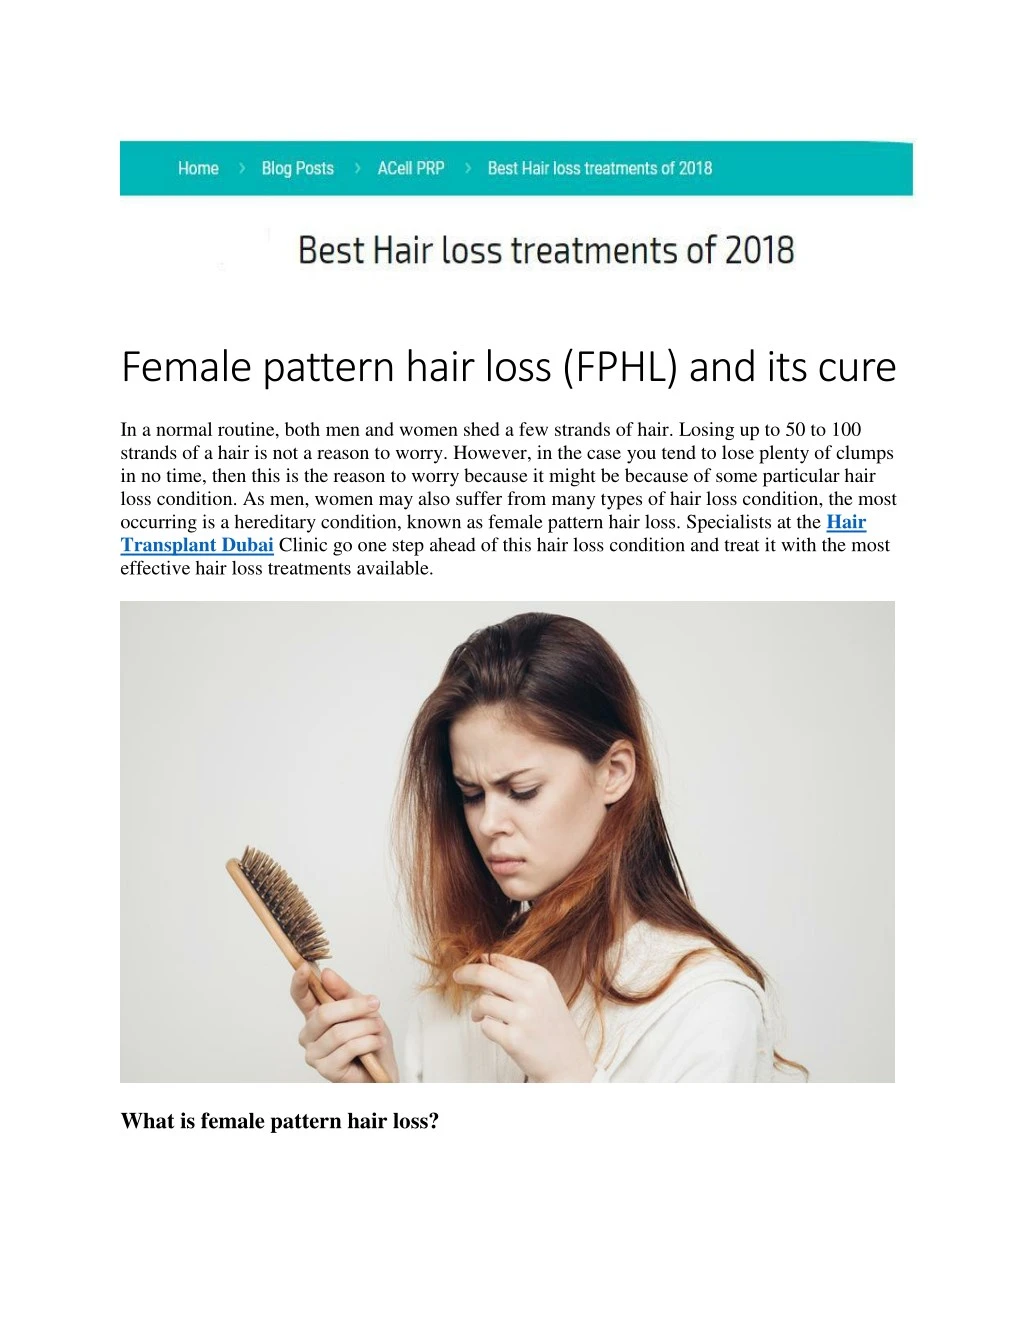 female pattern hair loss fphl and its cure